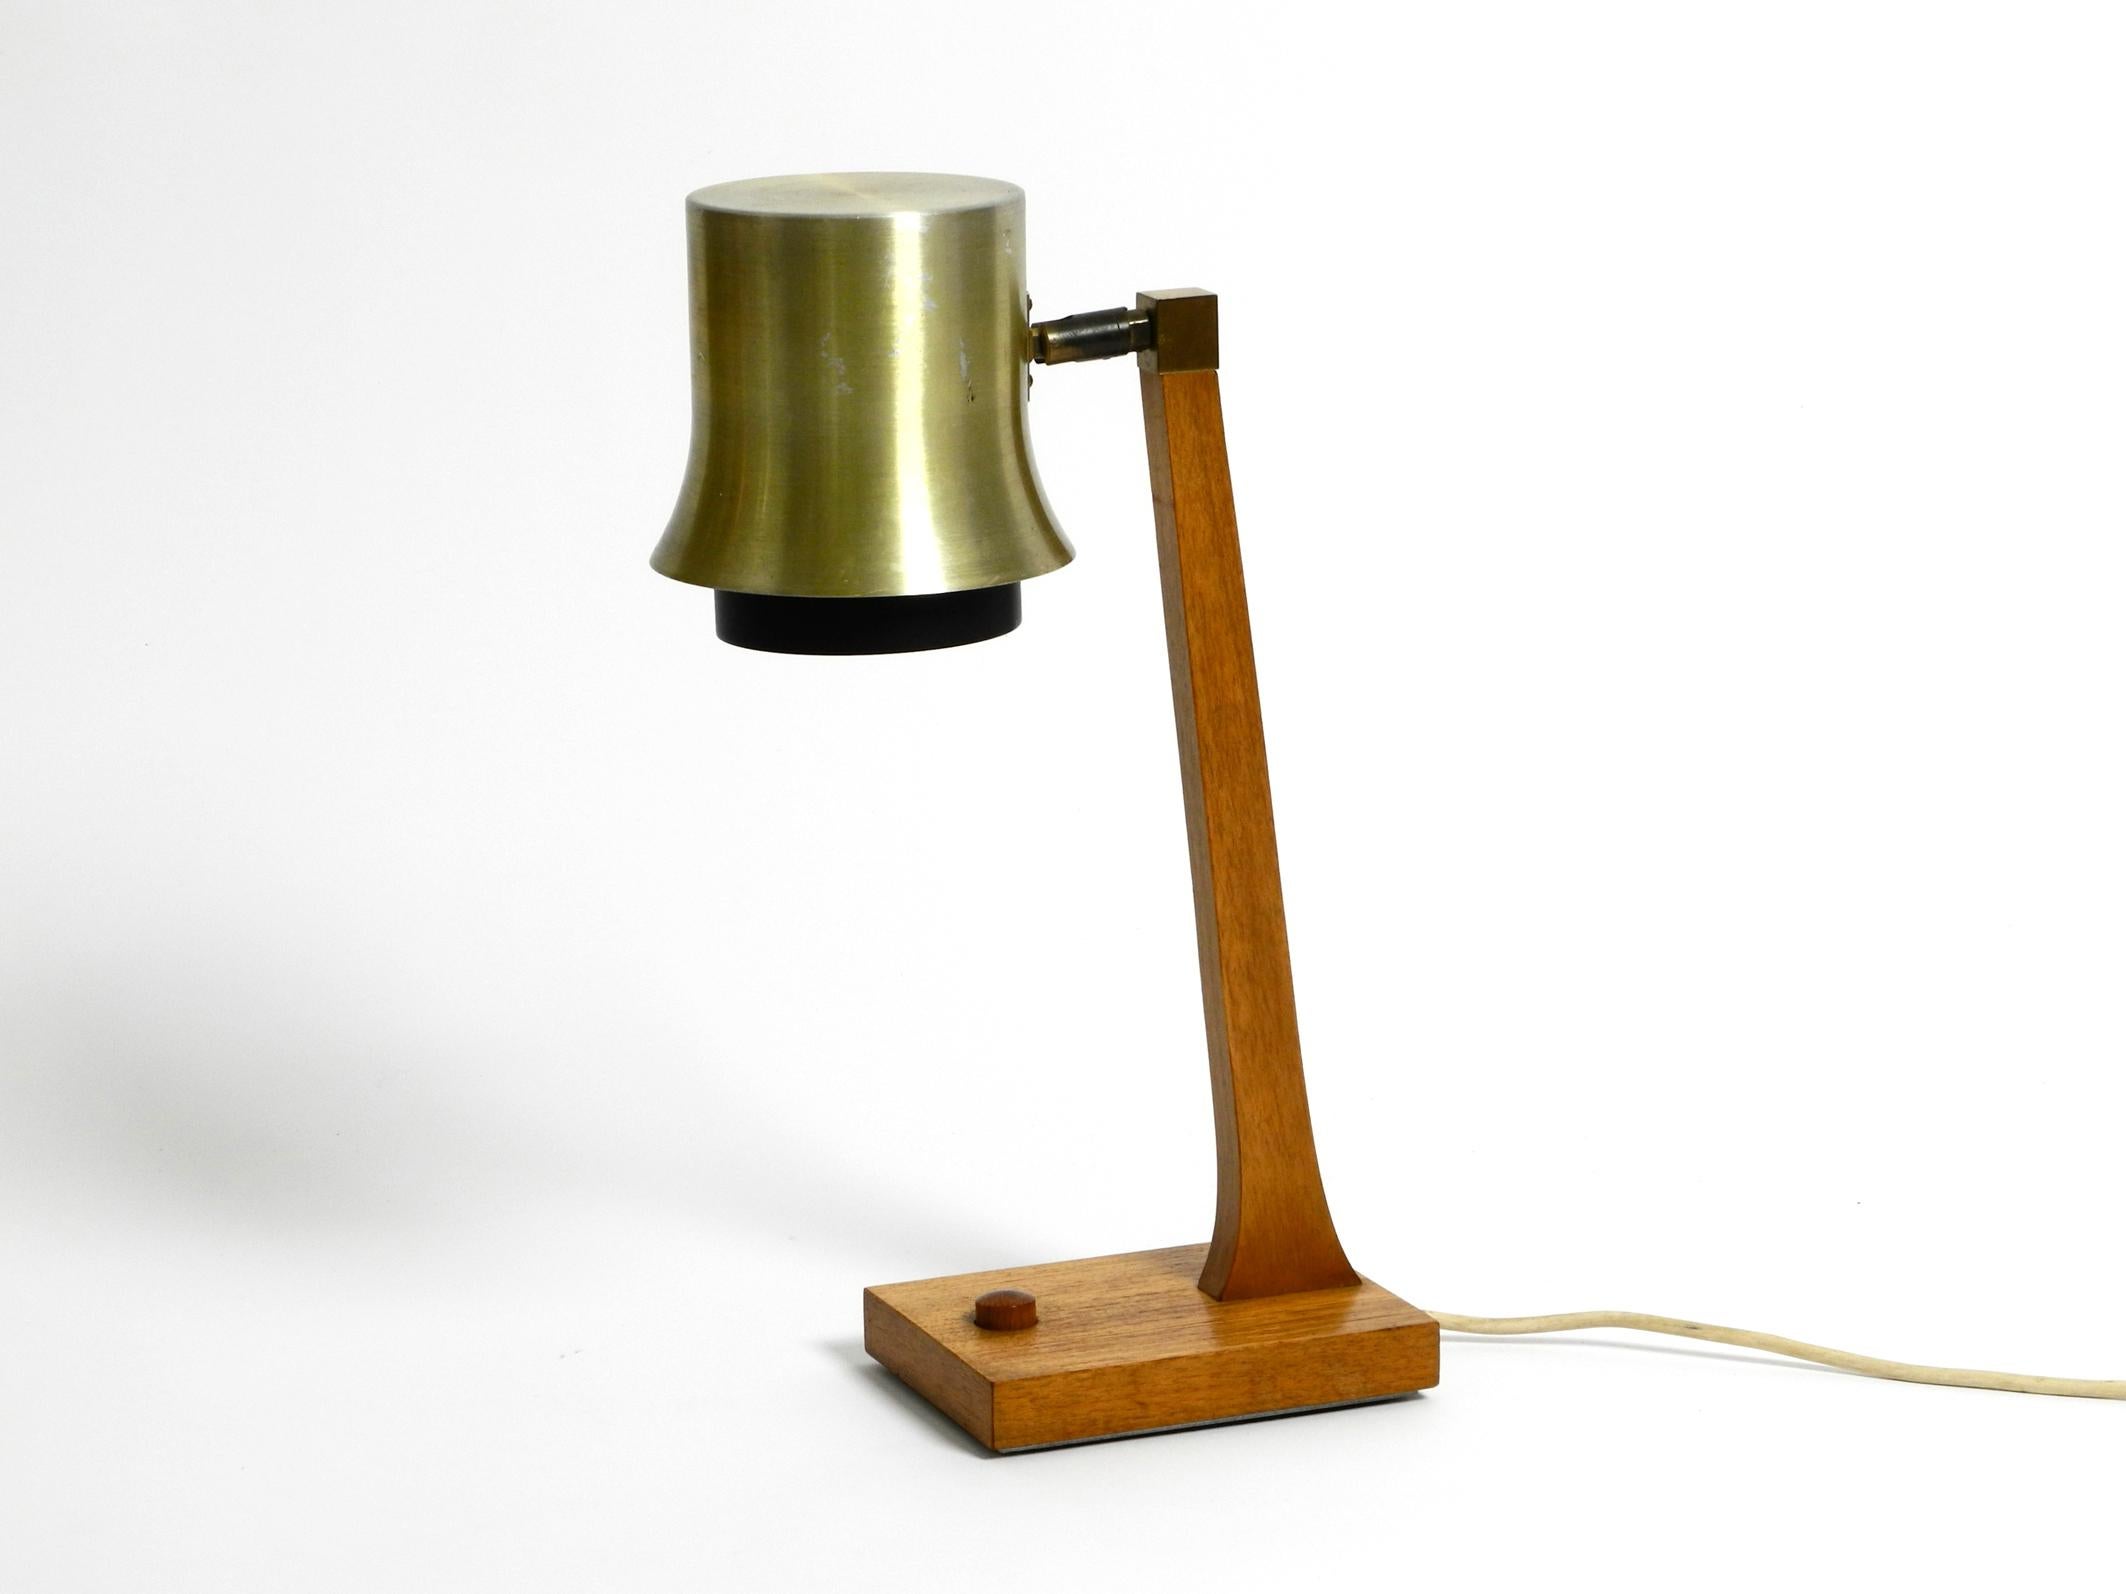 Extraordinary mid-century table lamp made of teak and with aluminum shade. Great Scandinavian design. Made in Denmark. Very high quality processing.
Base and neck are made of solid teak, even the switch on the base is made of teak.
The shade is